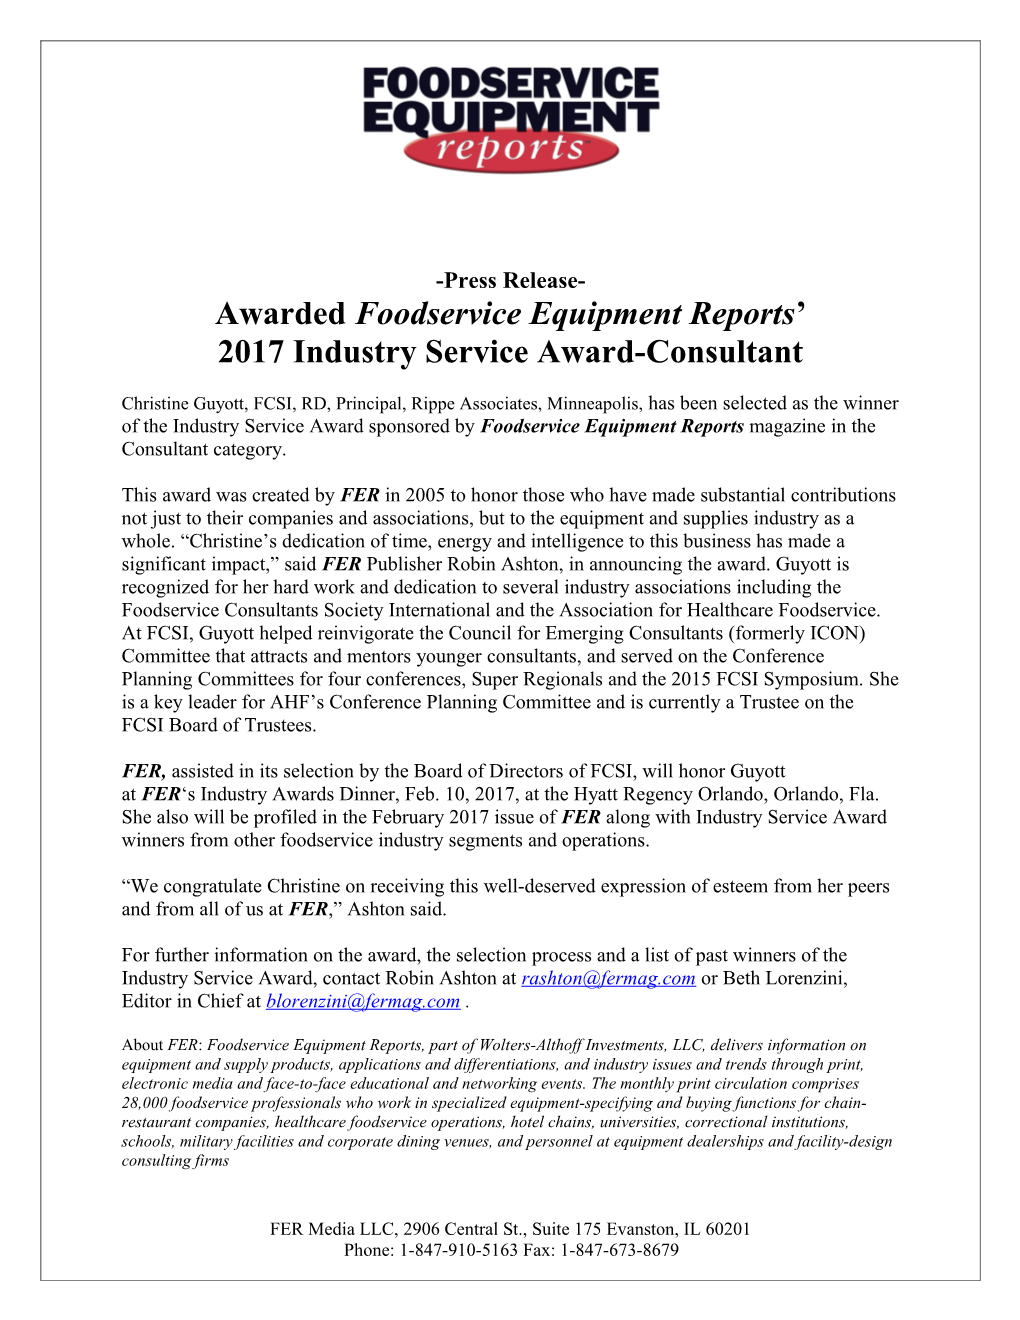 Awarded Foodservice Equipment Reports